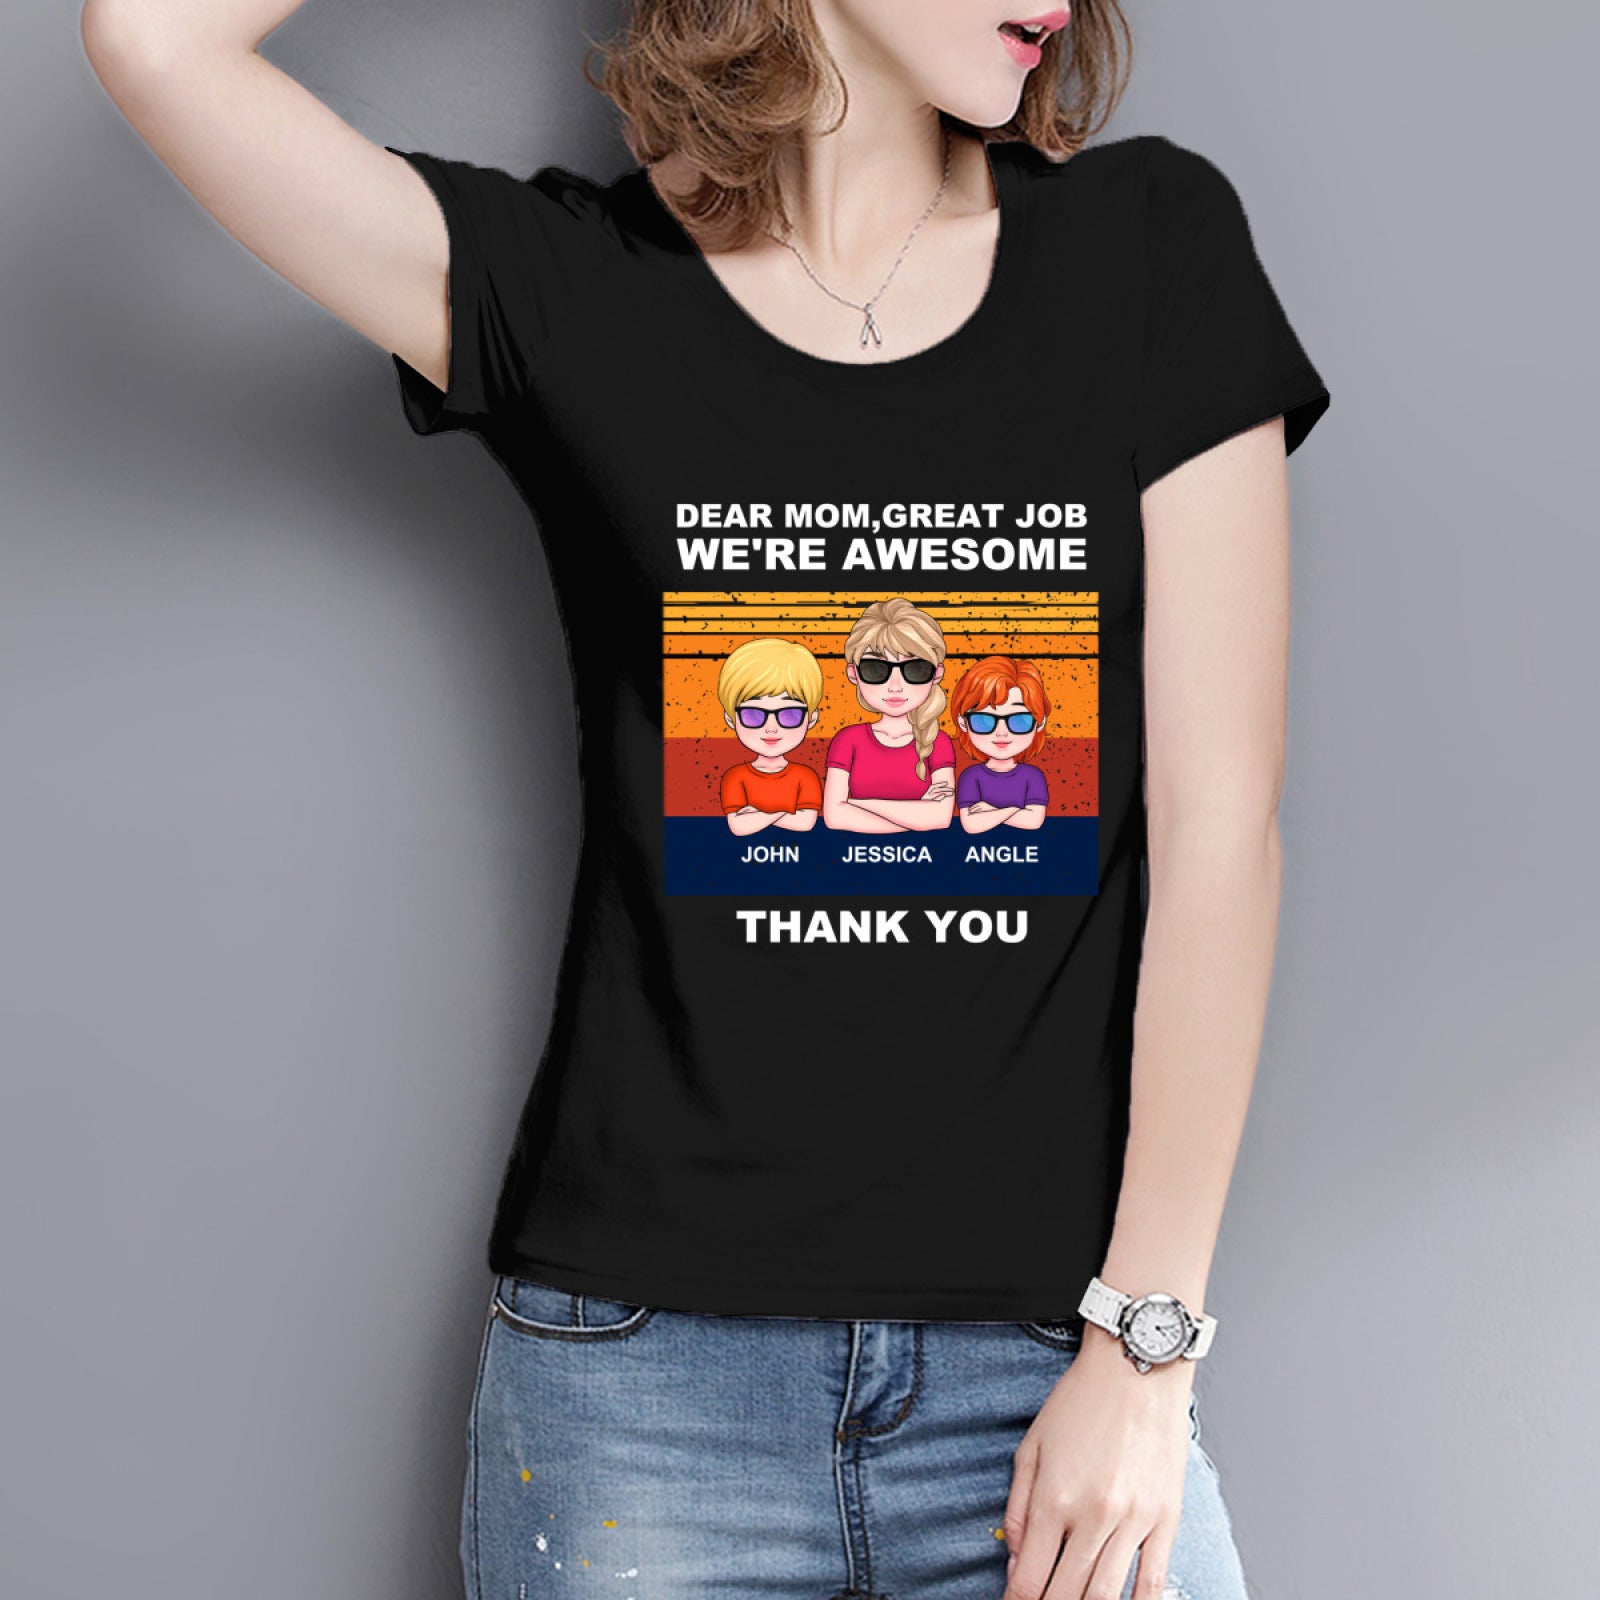 Personalized Custom T-Shirts For Women - Gifts For Mom, Mother's Day Gifts - colorfulcustom